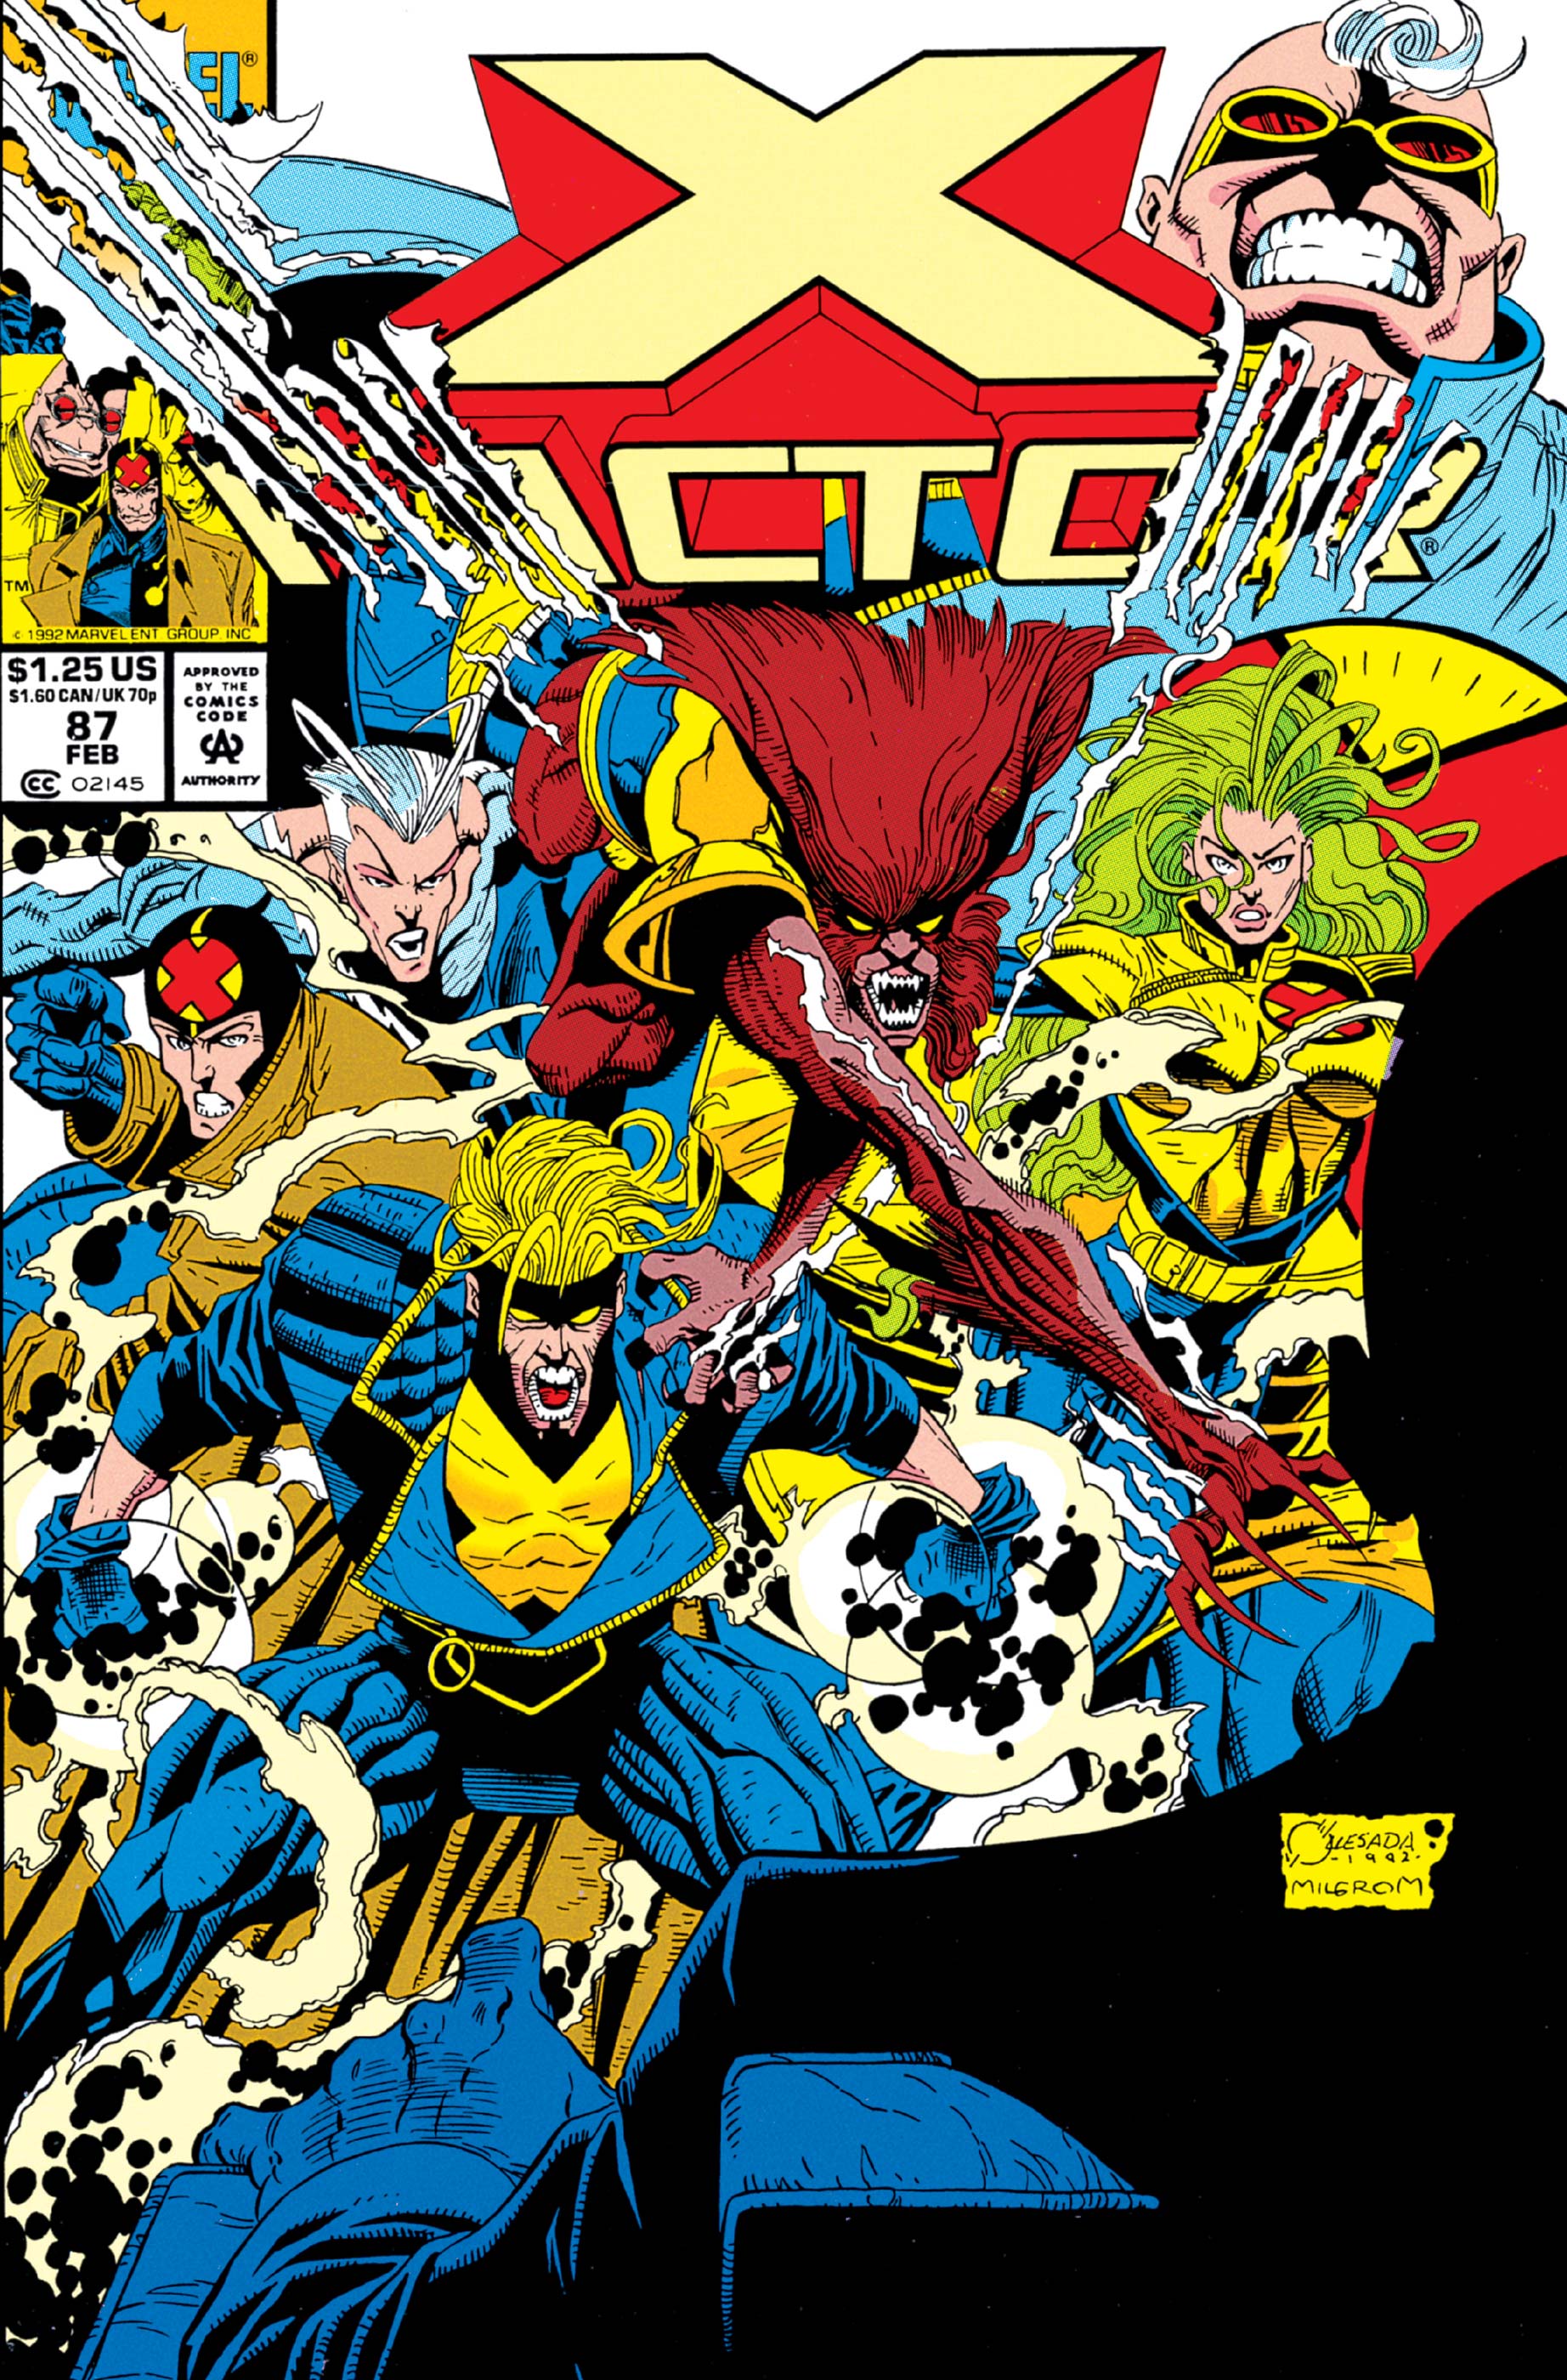 X-Factor (1986) #87 | Comic Issues | Marvel